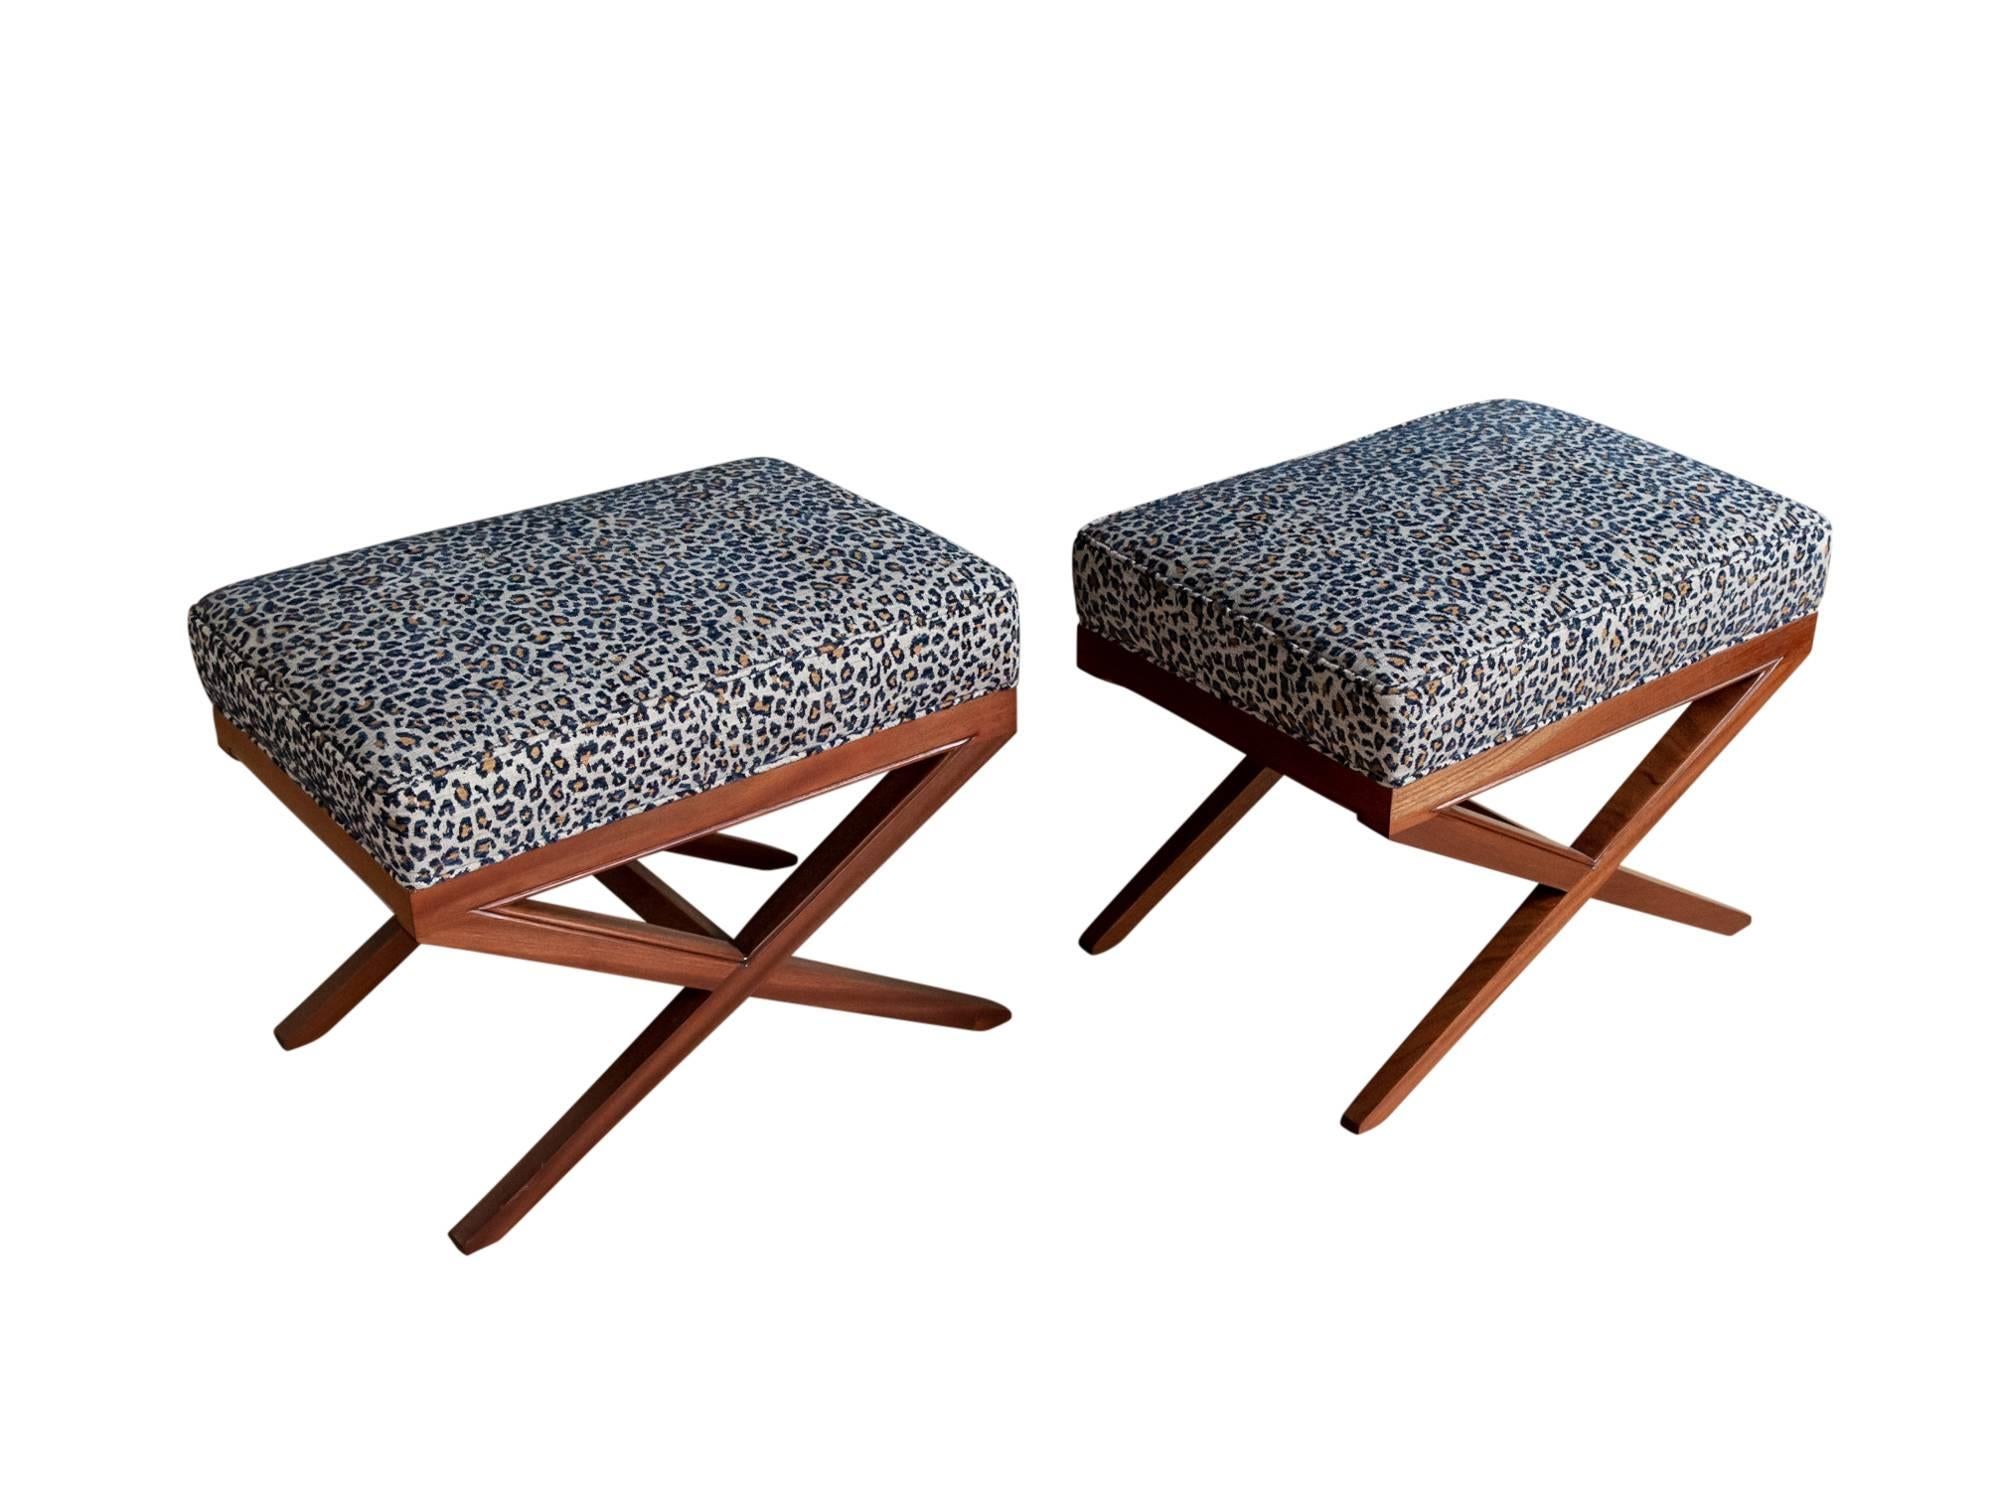 A pair of Hollywood Regency x-base stools or ottomans, circa 1940s or 1950s. Featuring exceptionally well-made mahogany frames supporting upholstered seats or tops. Recently refinished and in excellent condition. Leopard print fabric is also in